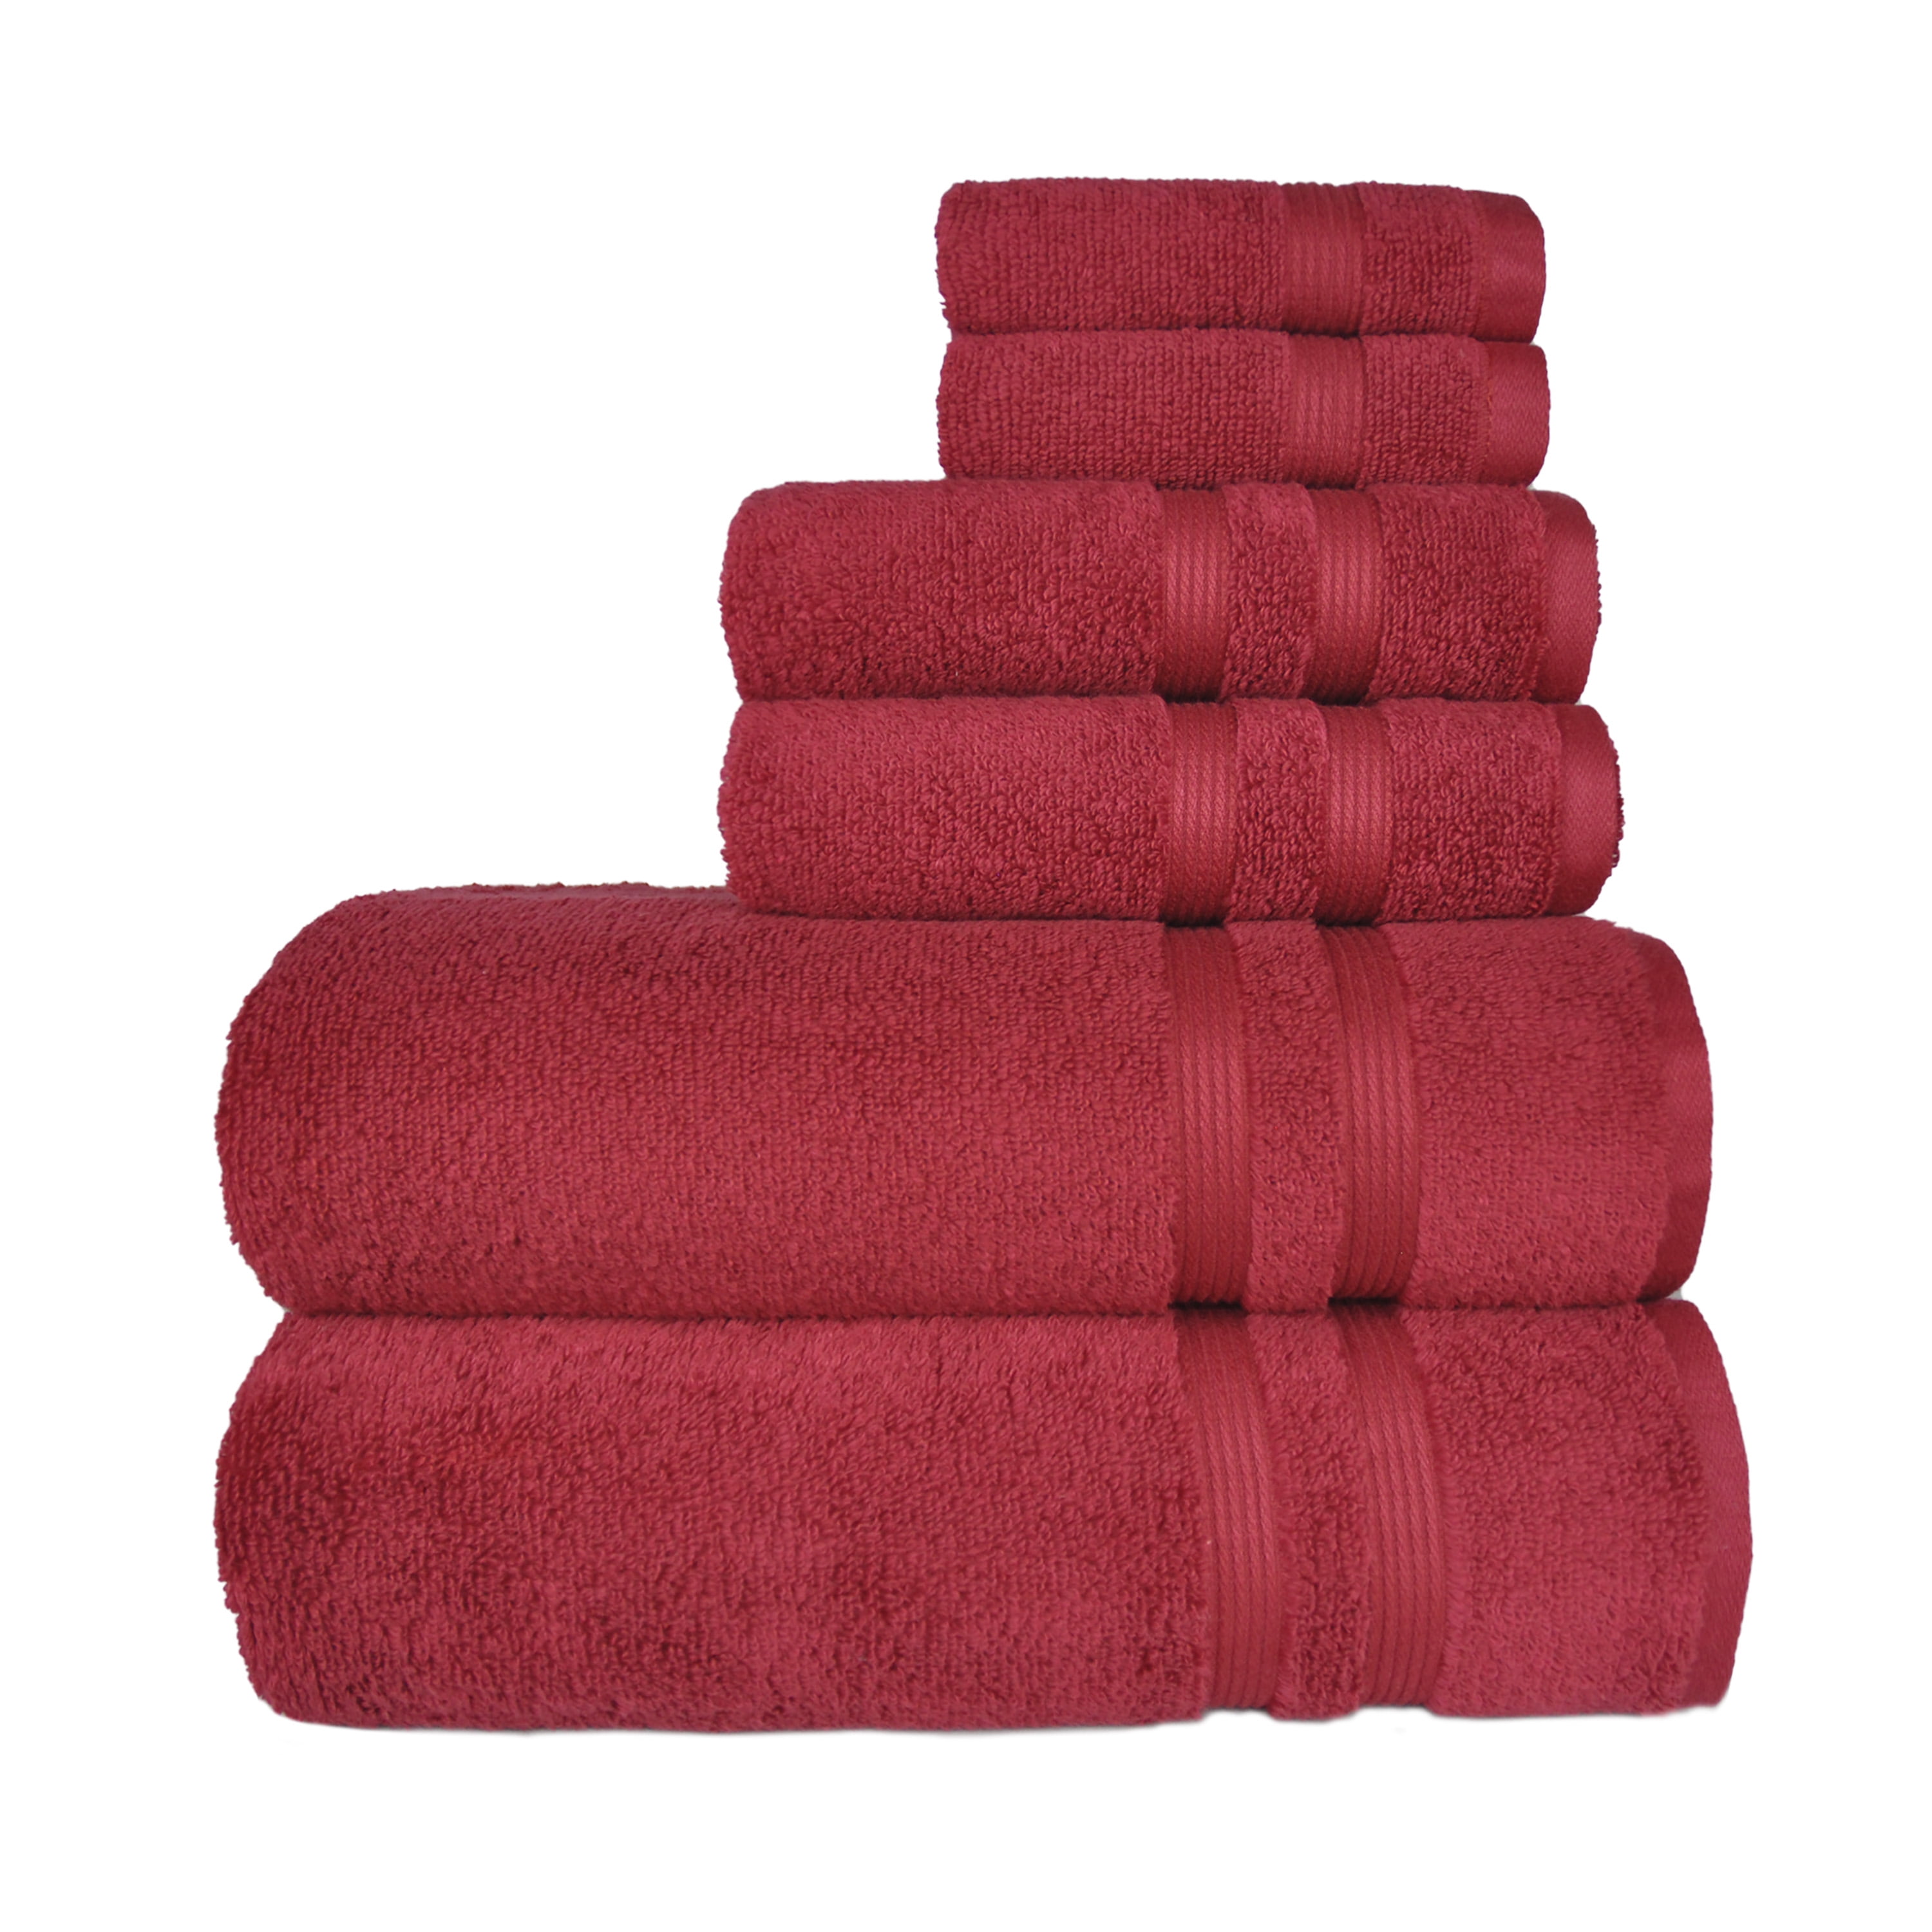 Mainstays 4-Pack 16”x26” Woven Kitchen Towel Set, Red Sedona 